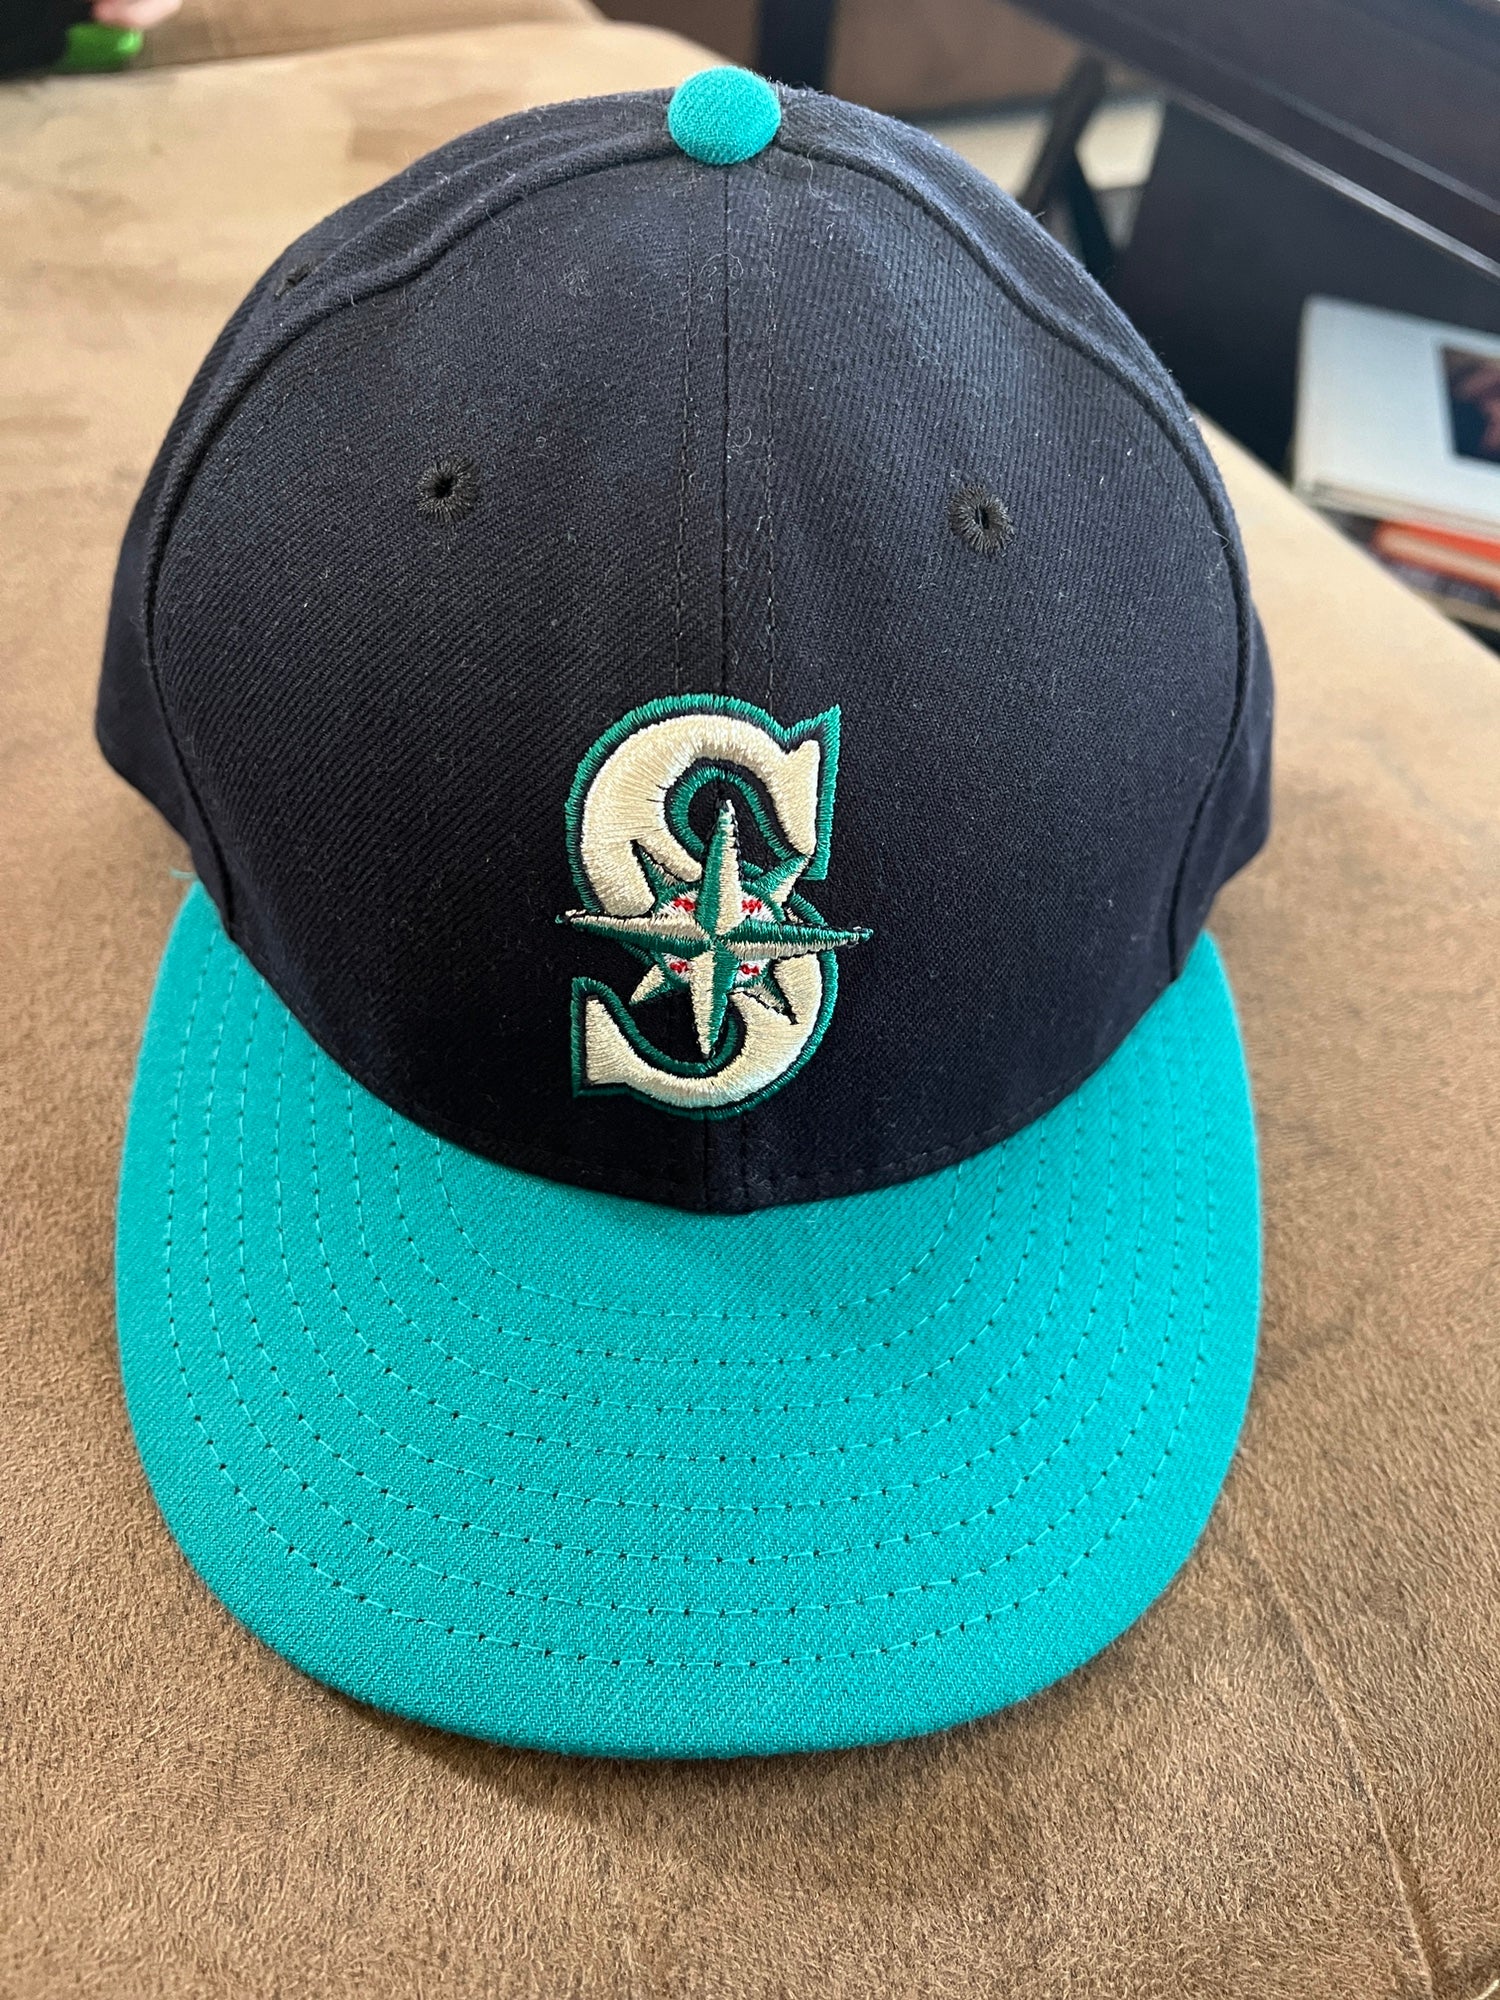 Seattle Mariners Hats, Mariners Gear, Seattle Mariners Pro Shop, Apparel